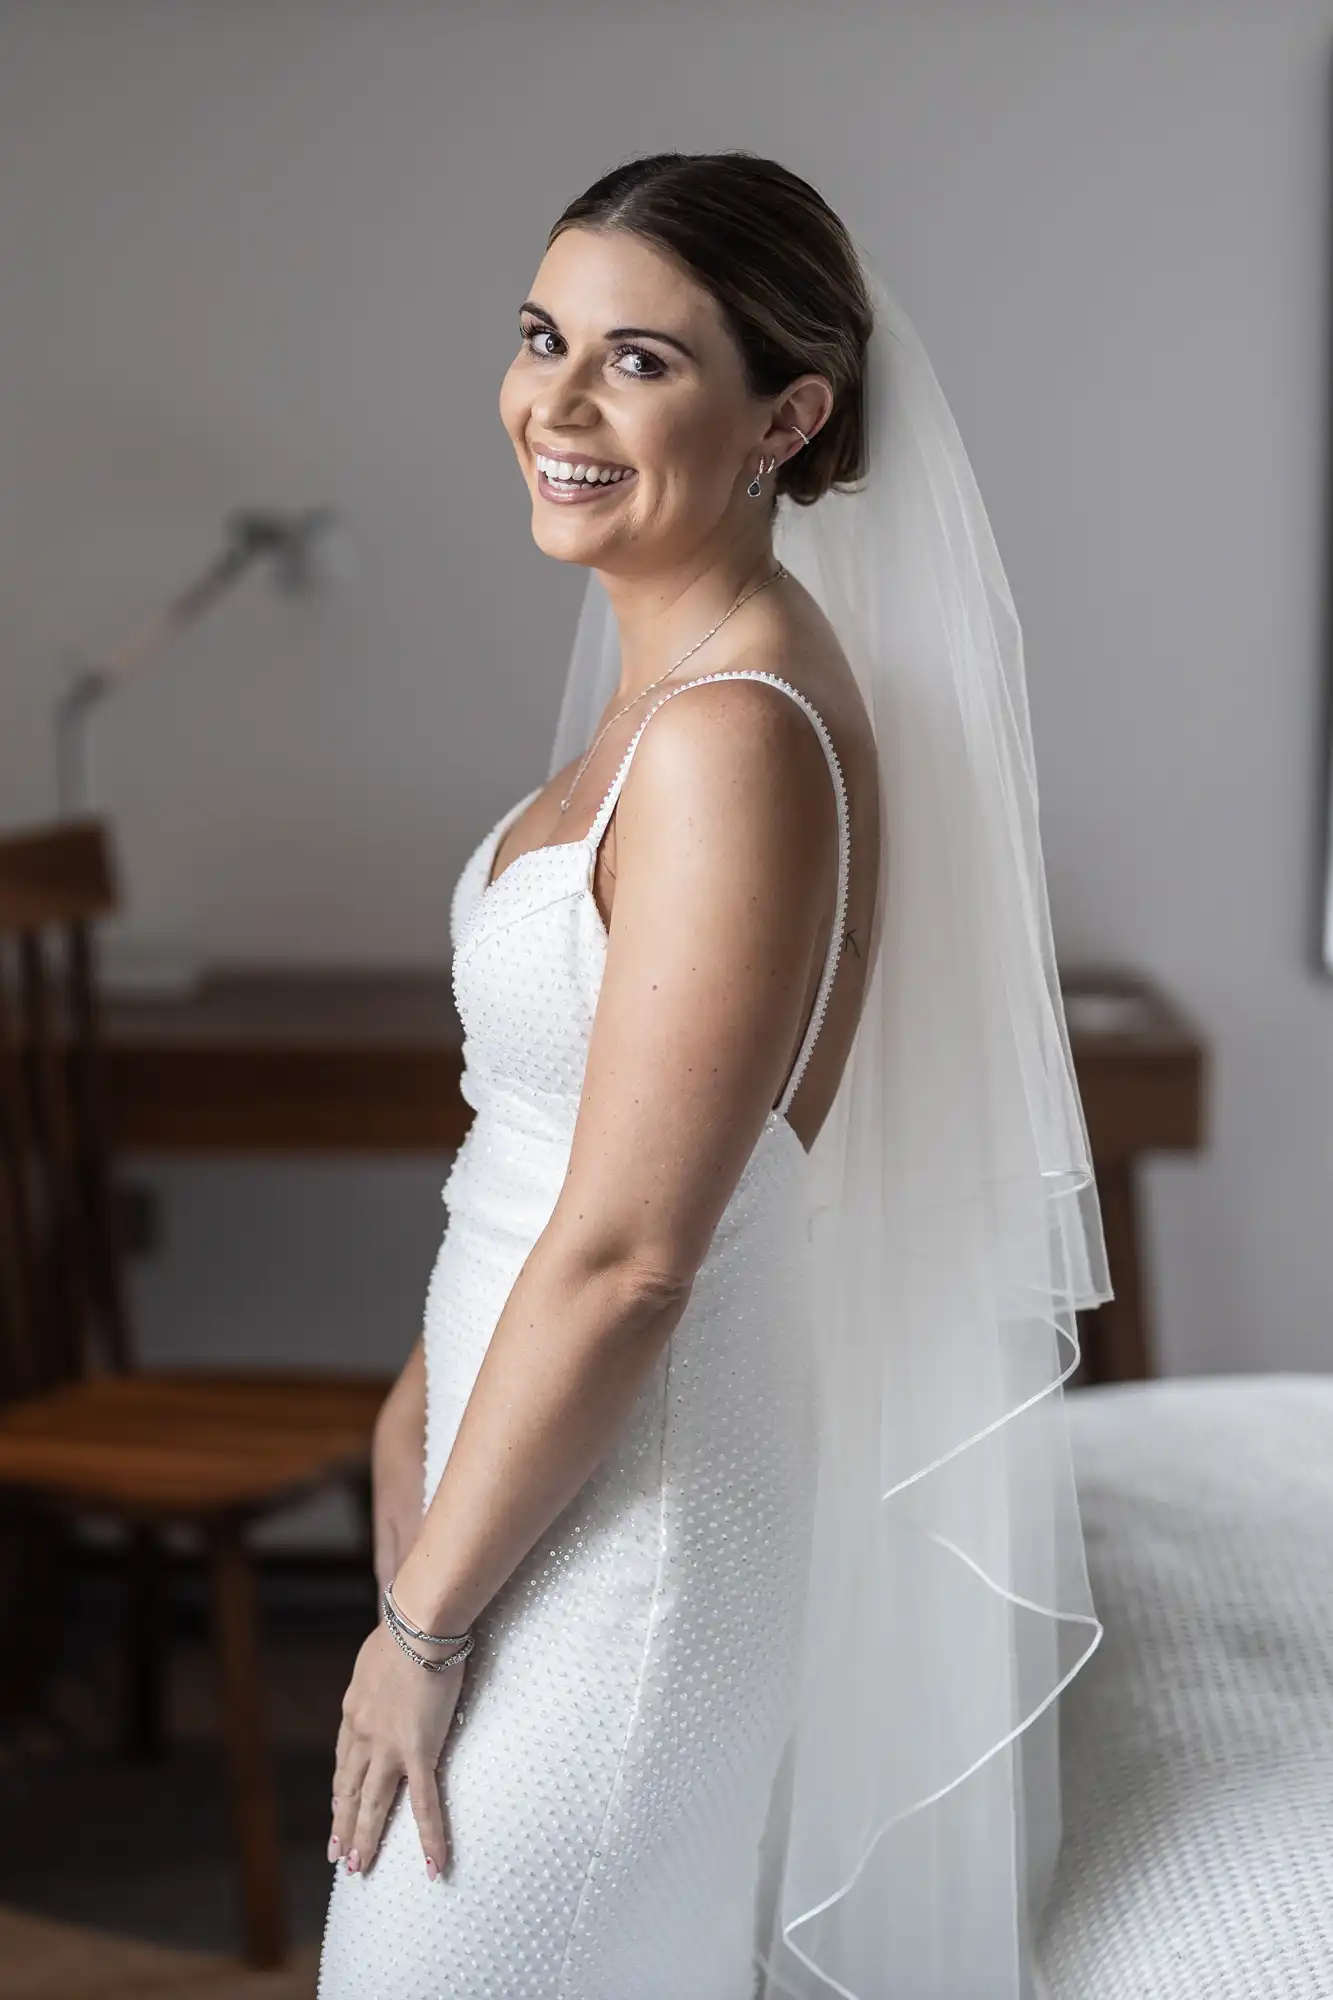 A smiling bride in a white beaded gown and veil stands in a room, turning to look over her shoulder.